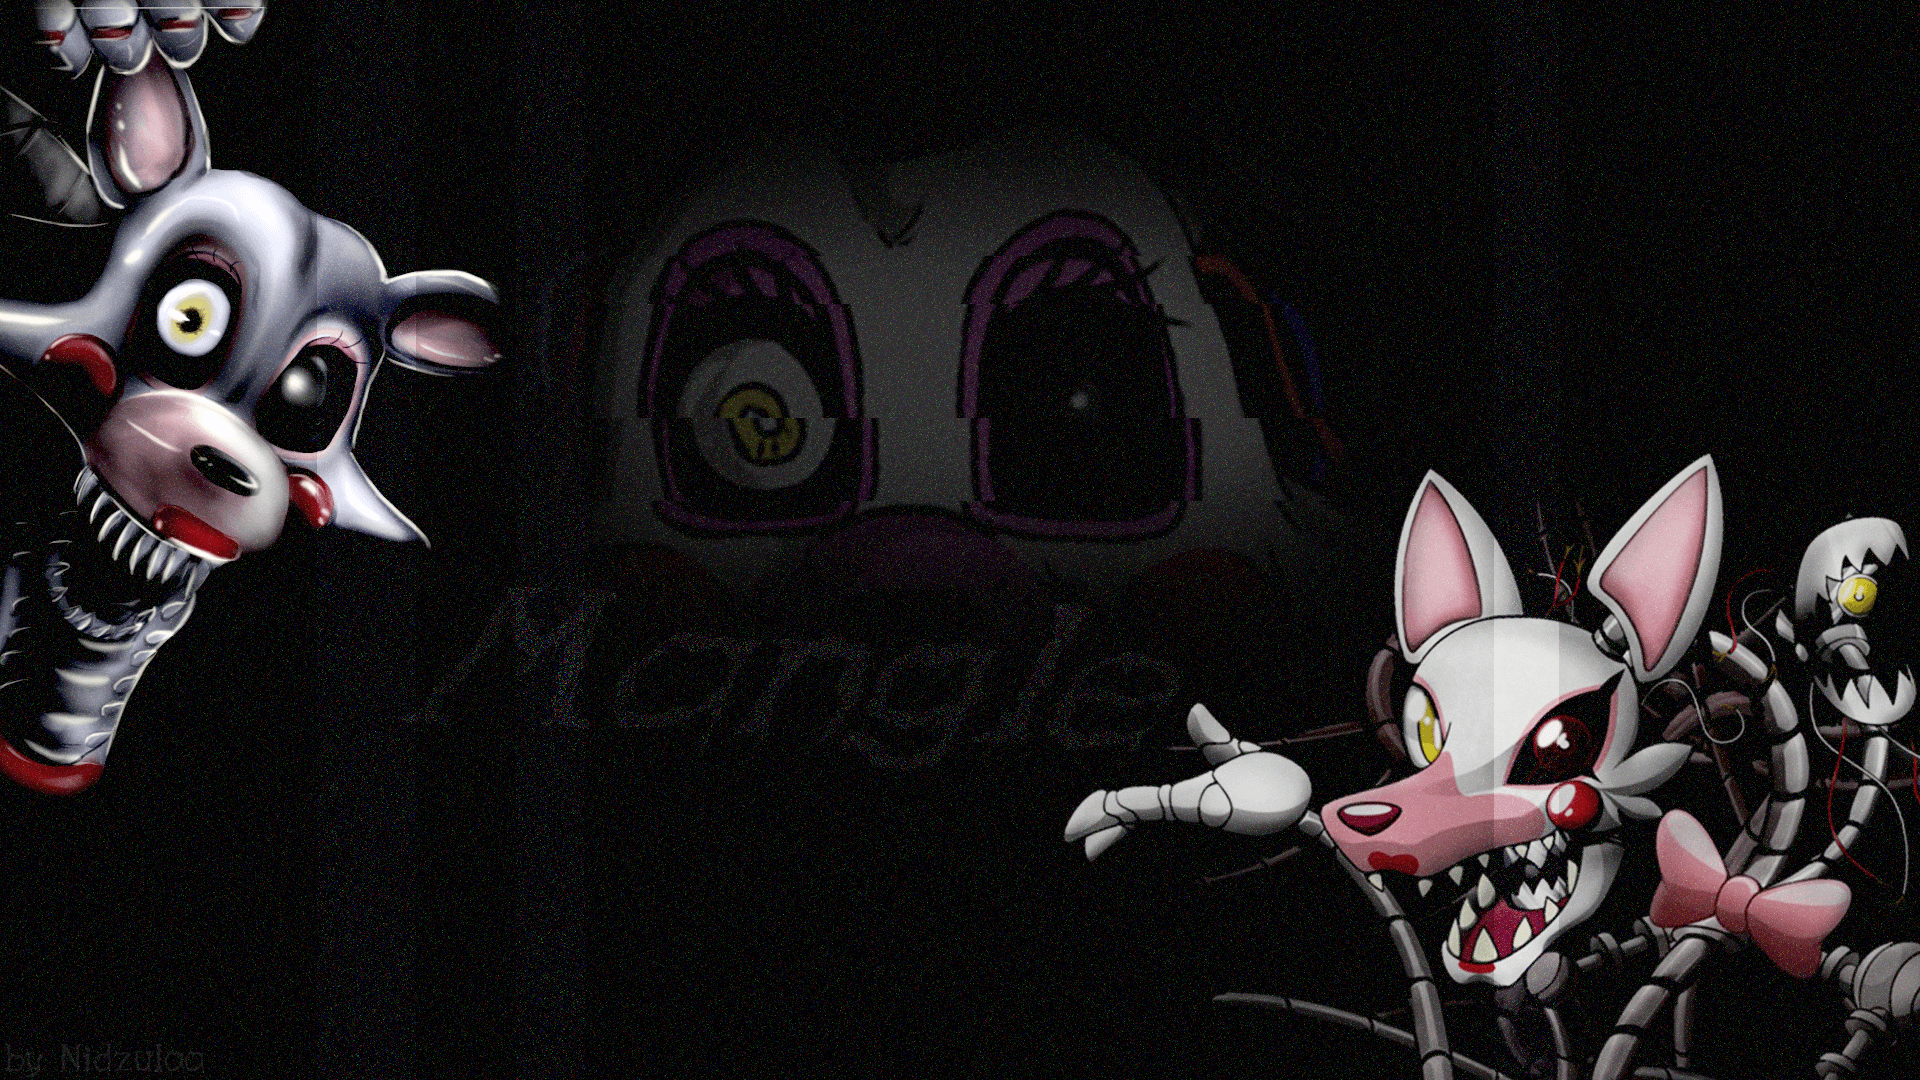 Mangle Wallpaper made by Me (1920*1080)